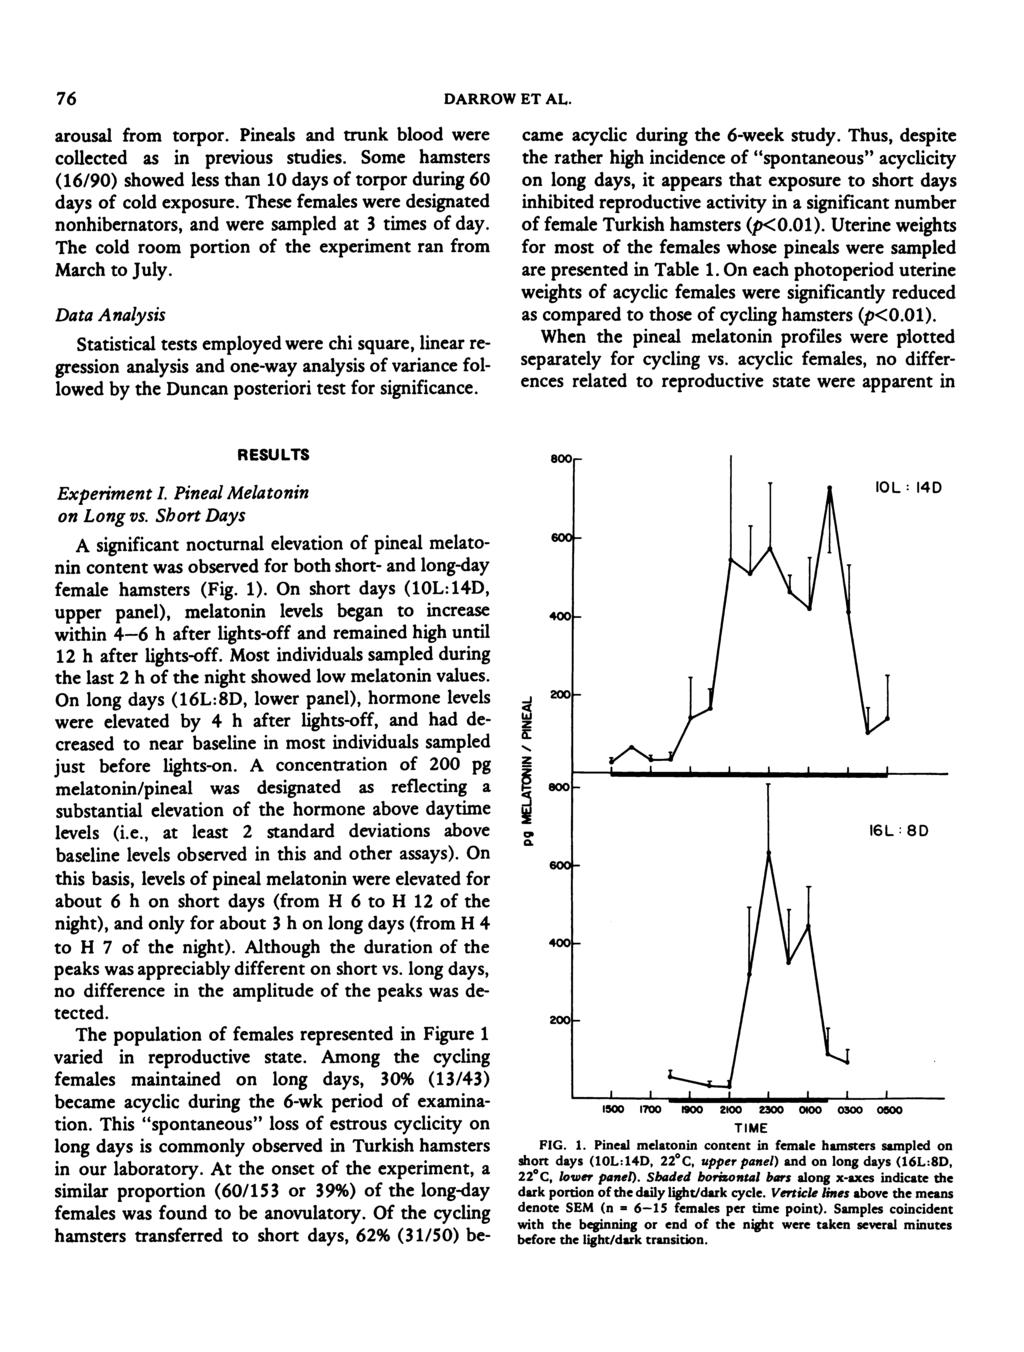 76 DARROW ET AL. arousal from torpor. Pineals and trunk blood were collected as in previous studies. Some hamsters (16/90) showed less than 10 days of torpor during 60 days of cold exposure.